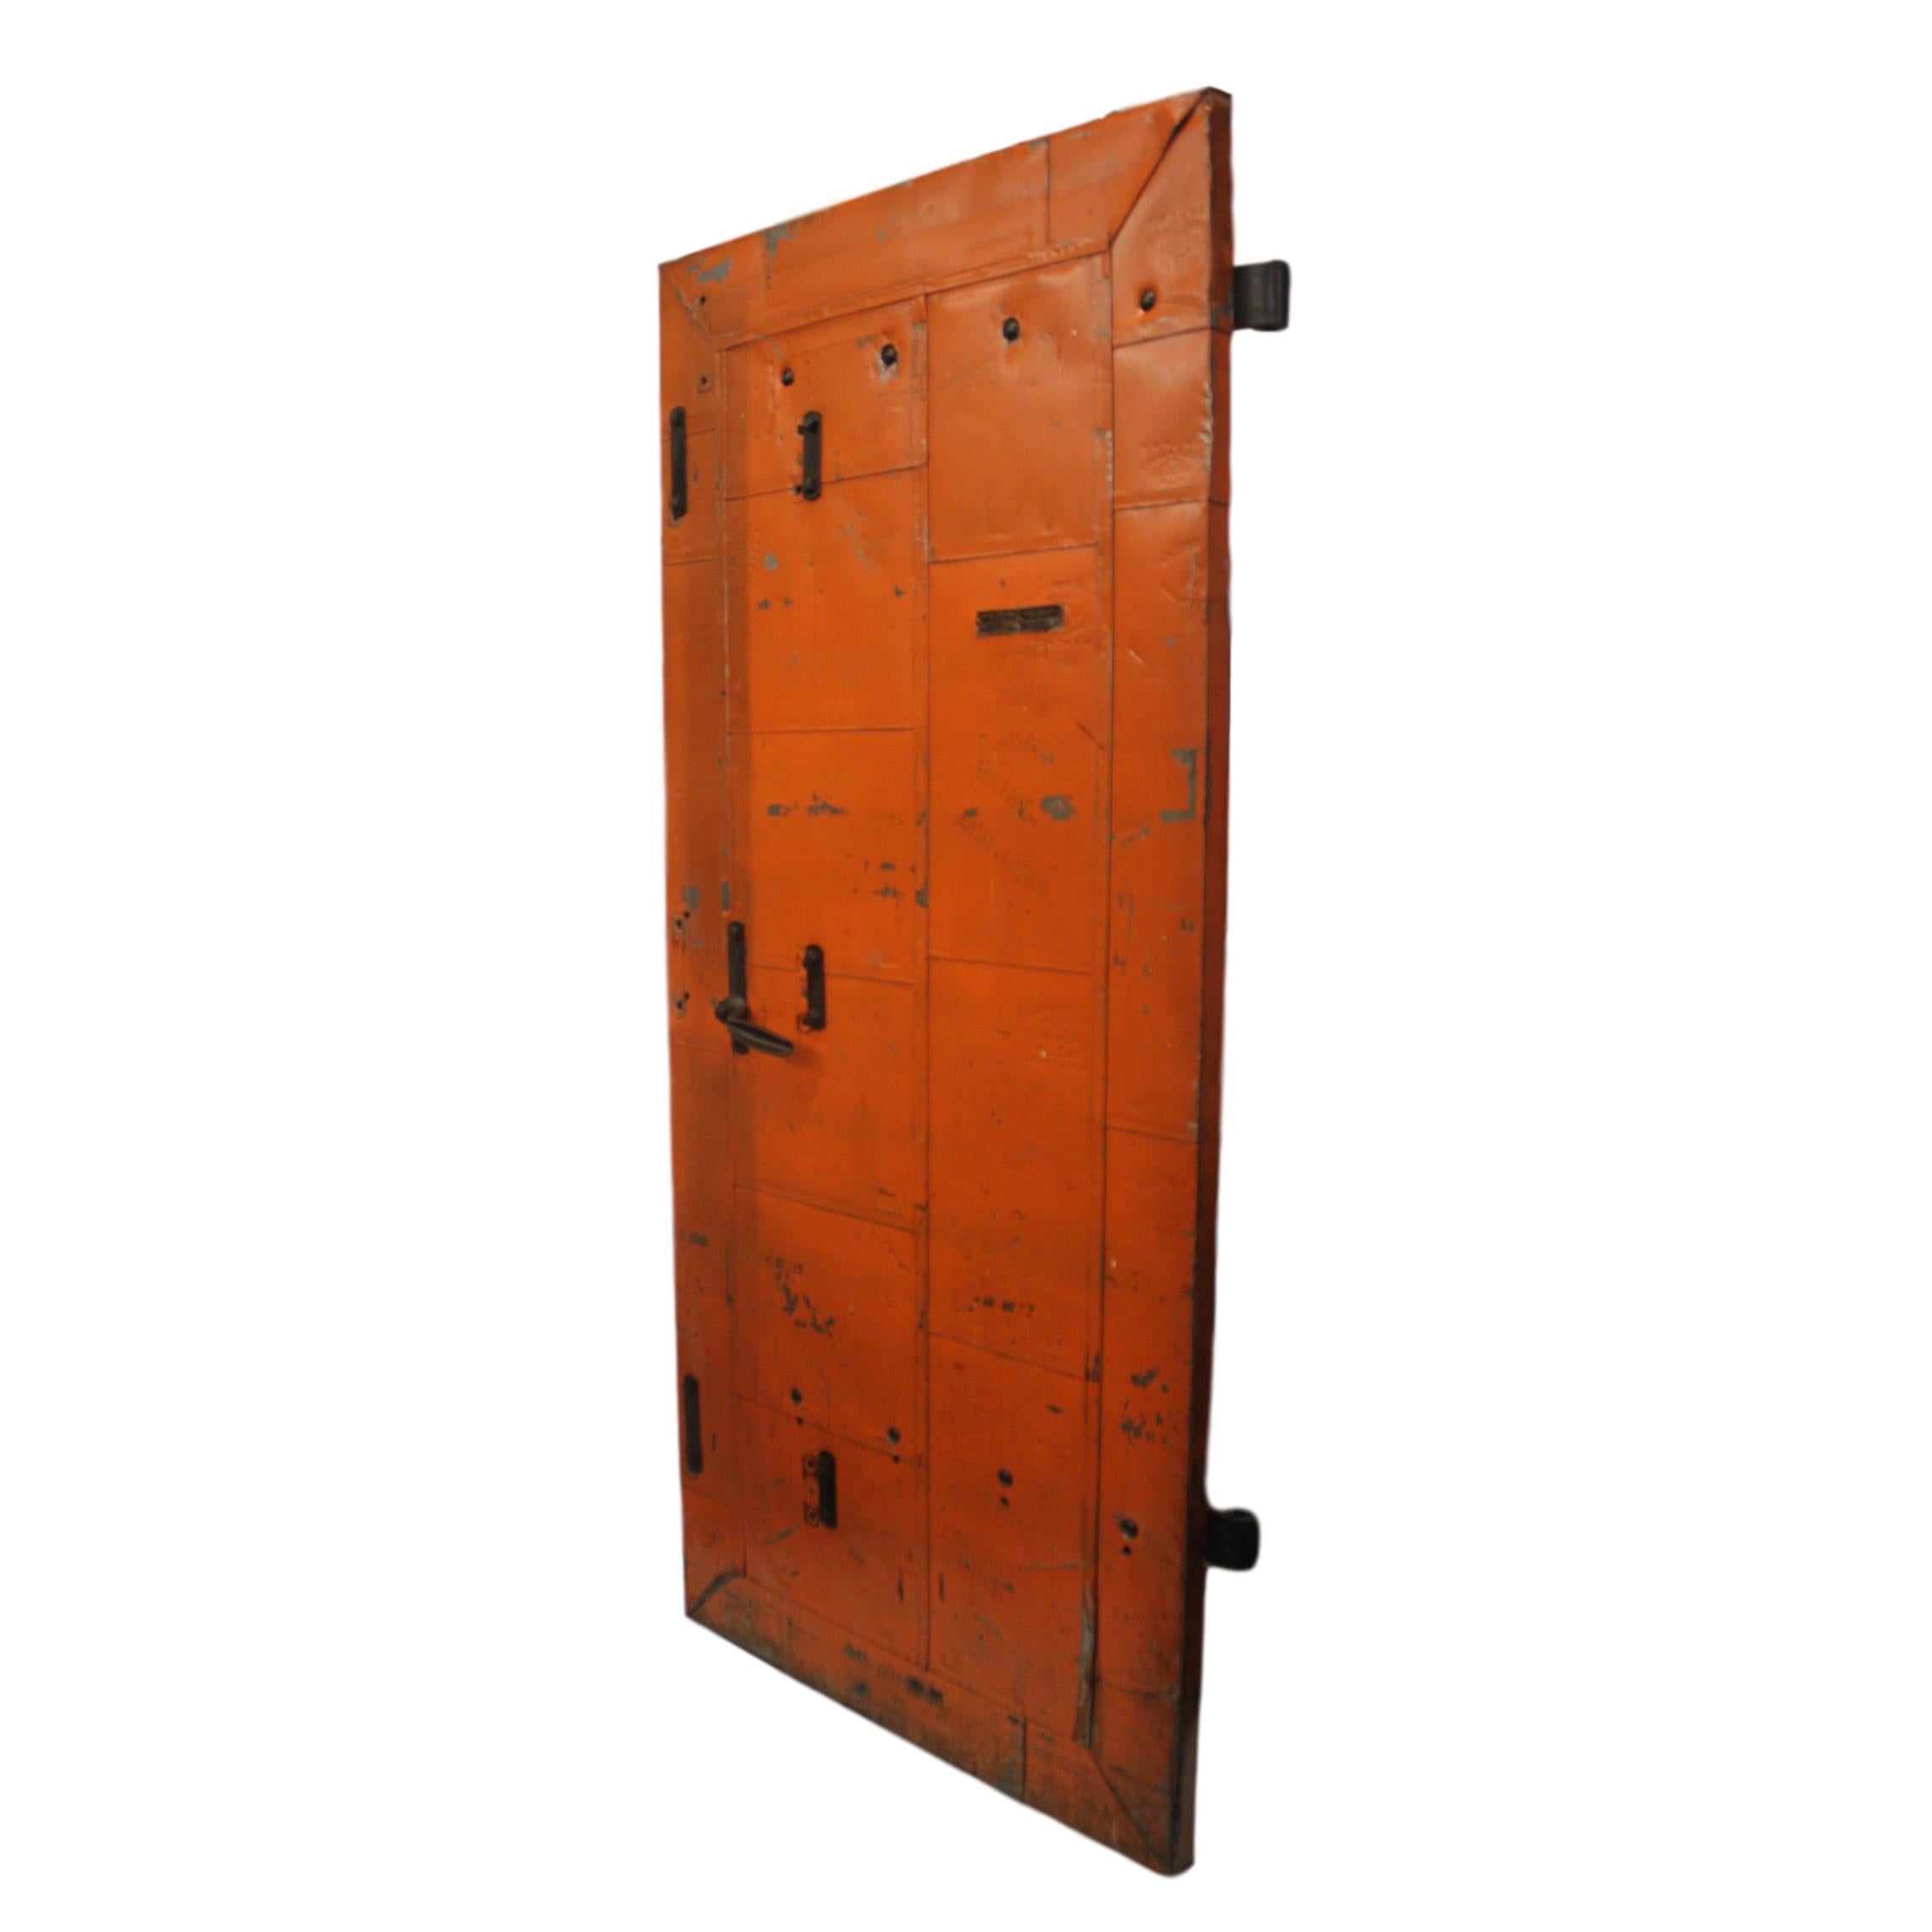 This heavy duty industrial fire door features a solid wood core completely sheathed in individual fire-proof steel-cladding, weathered orange paint and original hardware. Manufactured circa 1915 by The Richmond Fire Proof Door Co. of Richmond, IN.